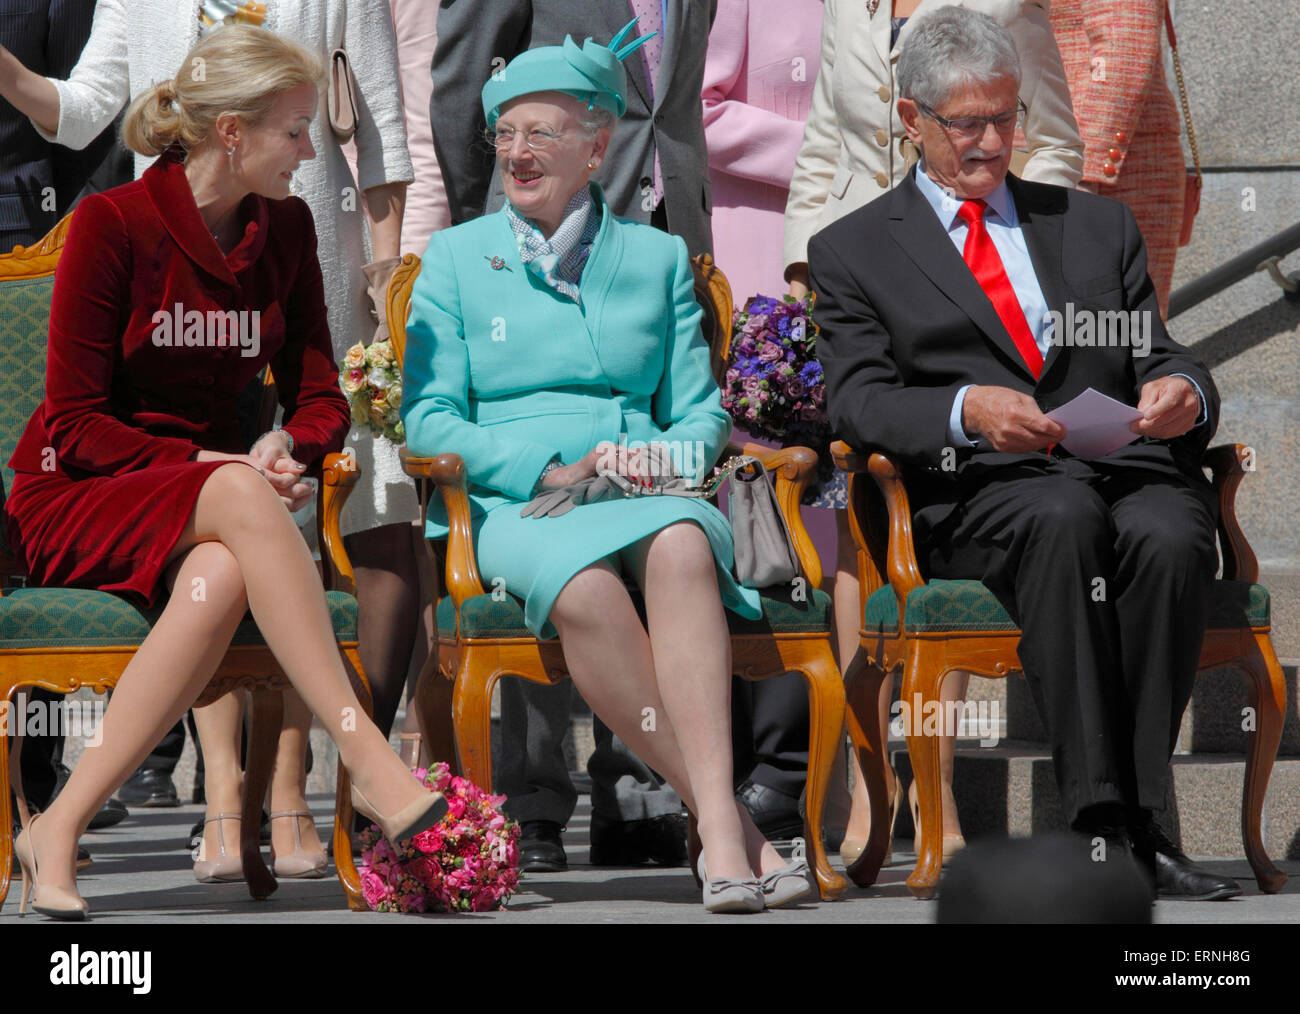 Copenhagen, Denmark, 5th June, 2015. Prime Minister Helle Thorning-Schmidt, H.M. Queen Margrethe II of Denmark, and Speaker of Parliament, Mogens Lykketoft in the Christiansborg Palace yard awaiting the commemorative parade in historic garments in celebration of the 100th anniversary of the constitution amendment in 1915 that gave Danish women the right to vote and stand for election. Credit:  Niels Quist/Alamy Live News Stock Photo